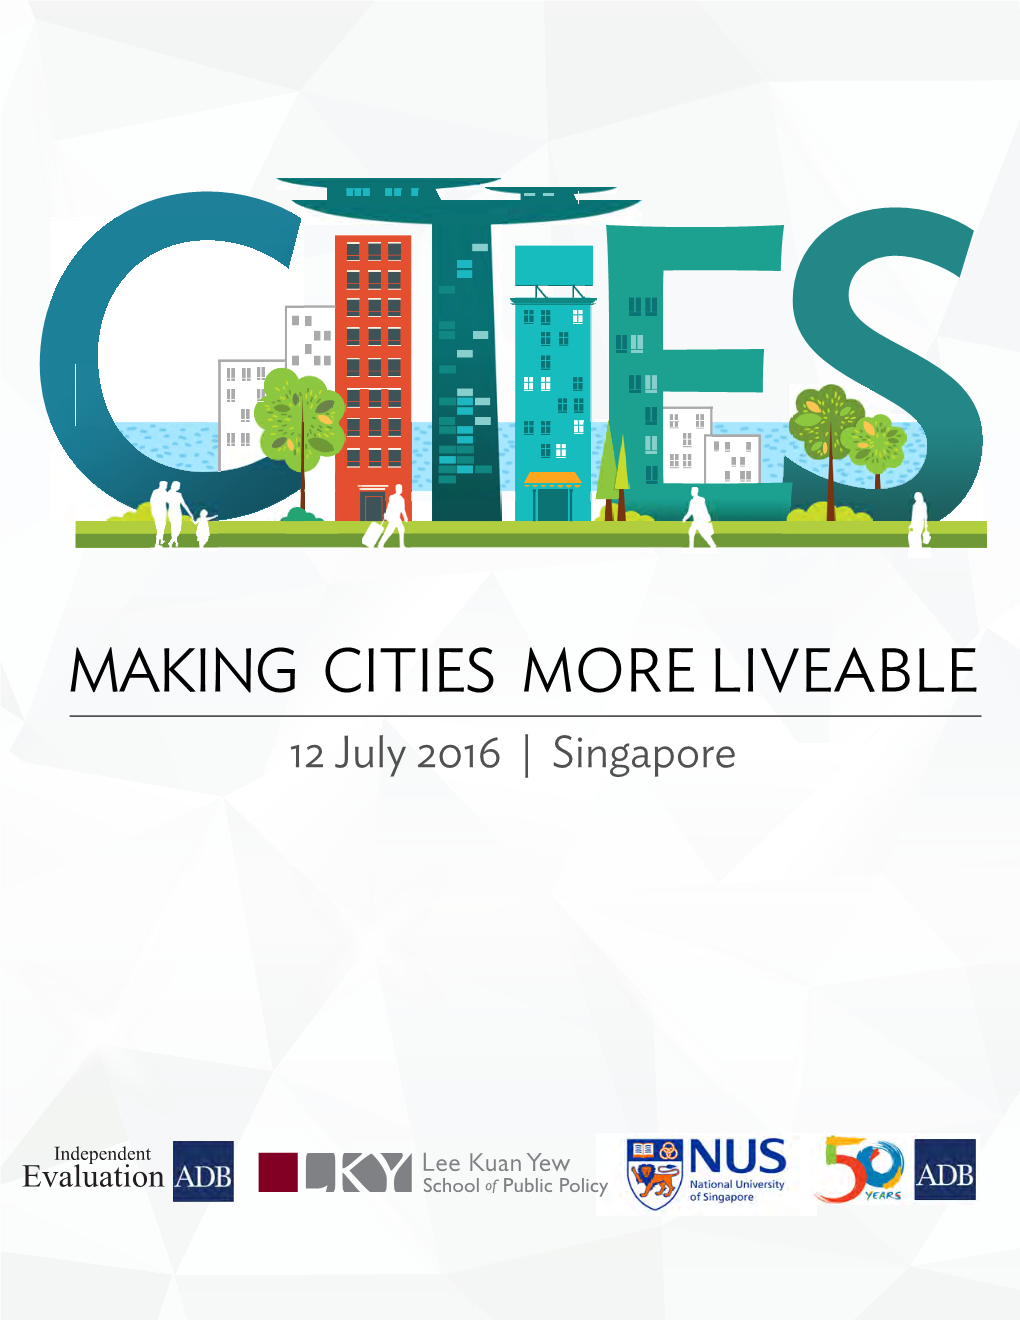 Cities and Middle Income Countries: Making Cities More Liveable